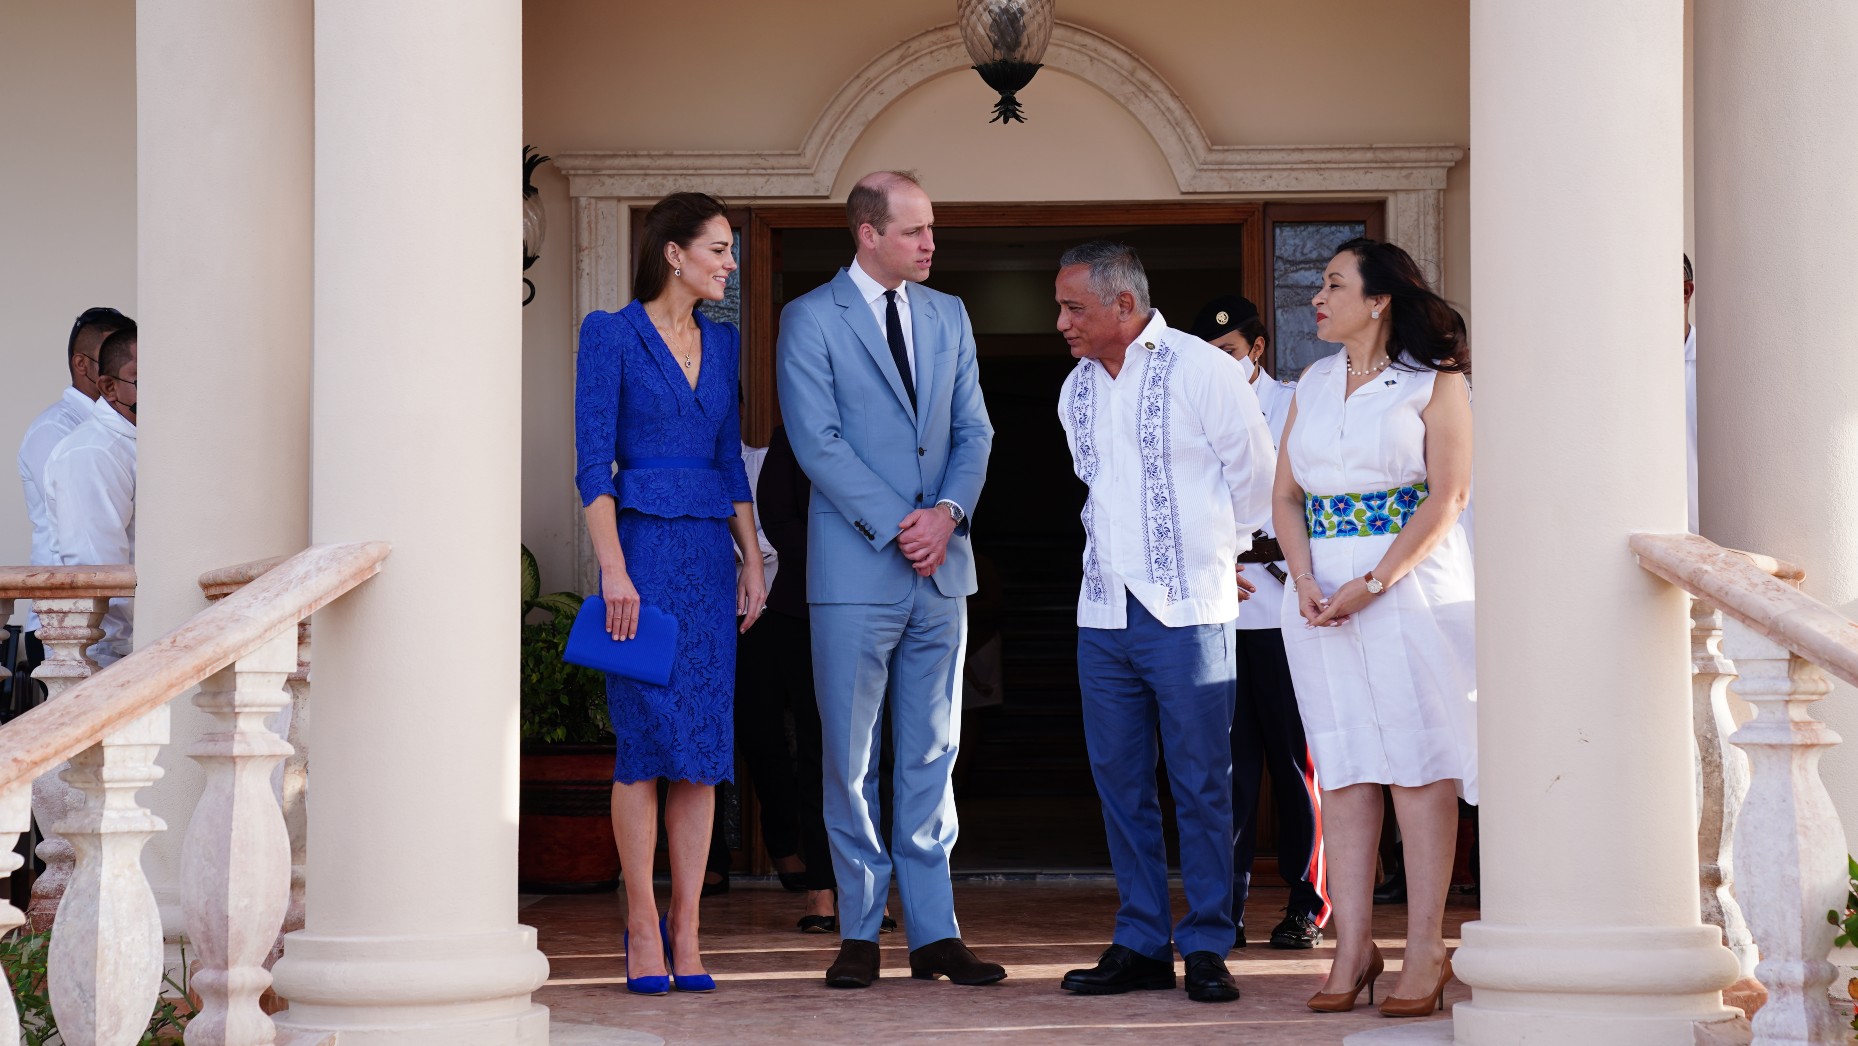 The Cambridges meet Belize’s Prime Minister Johnny Briceno and his wife Rossana